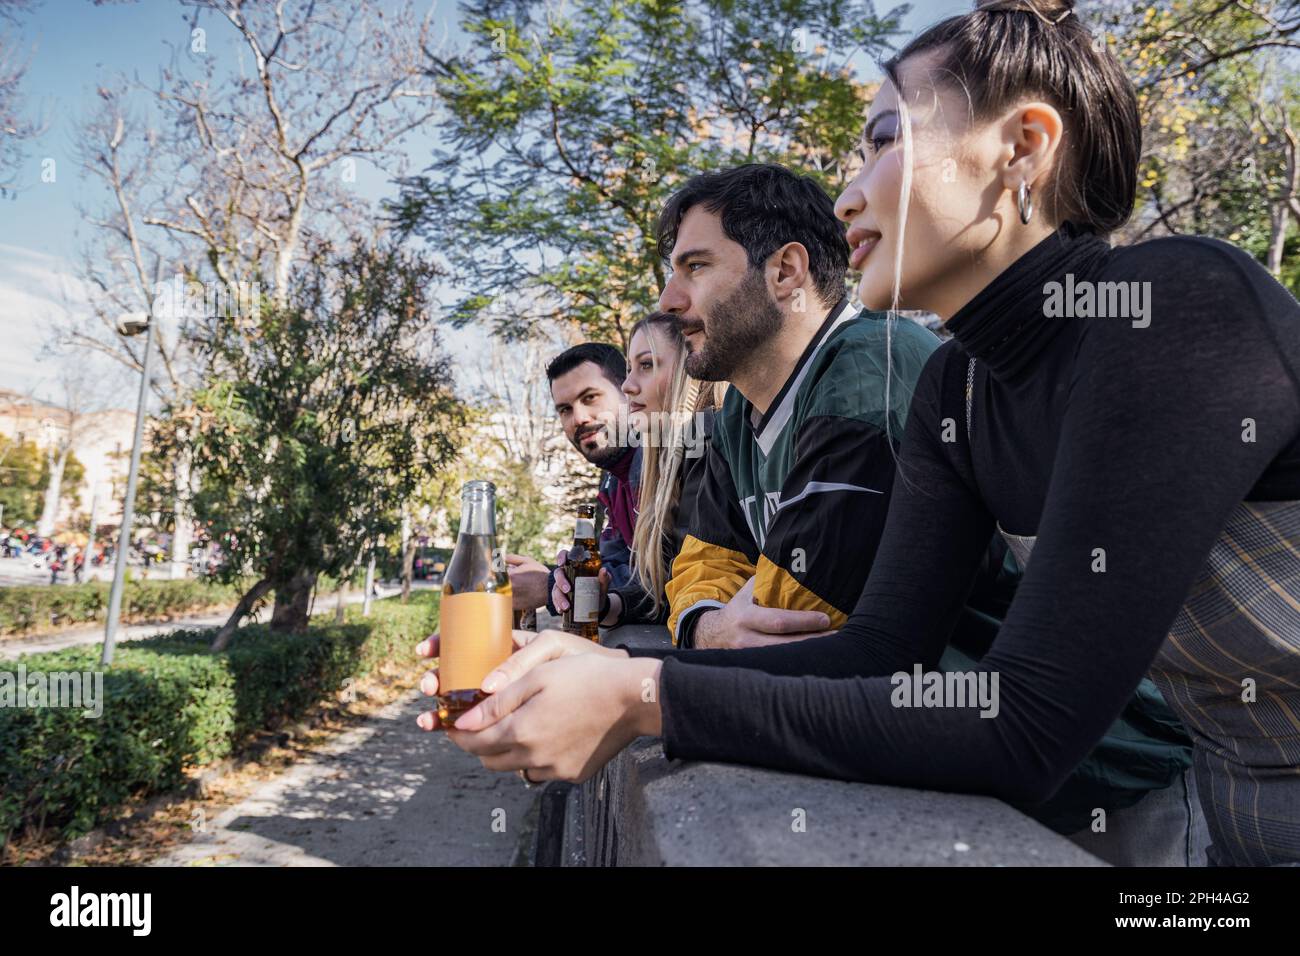 Two men and two women relax together, leaning on a stone railing, holding bottled drinks (beer and soda). Profile view, diverse group with Caucasian a Stock Photo